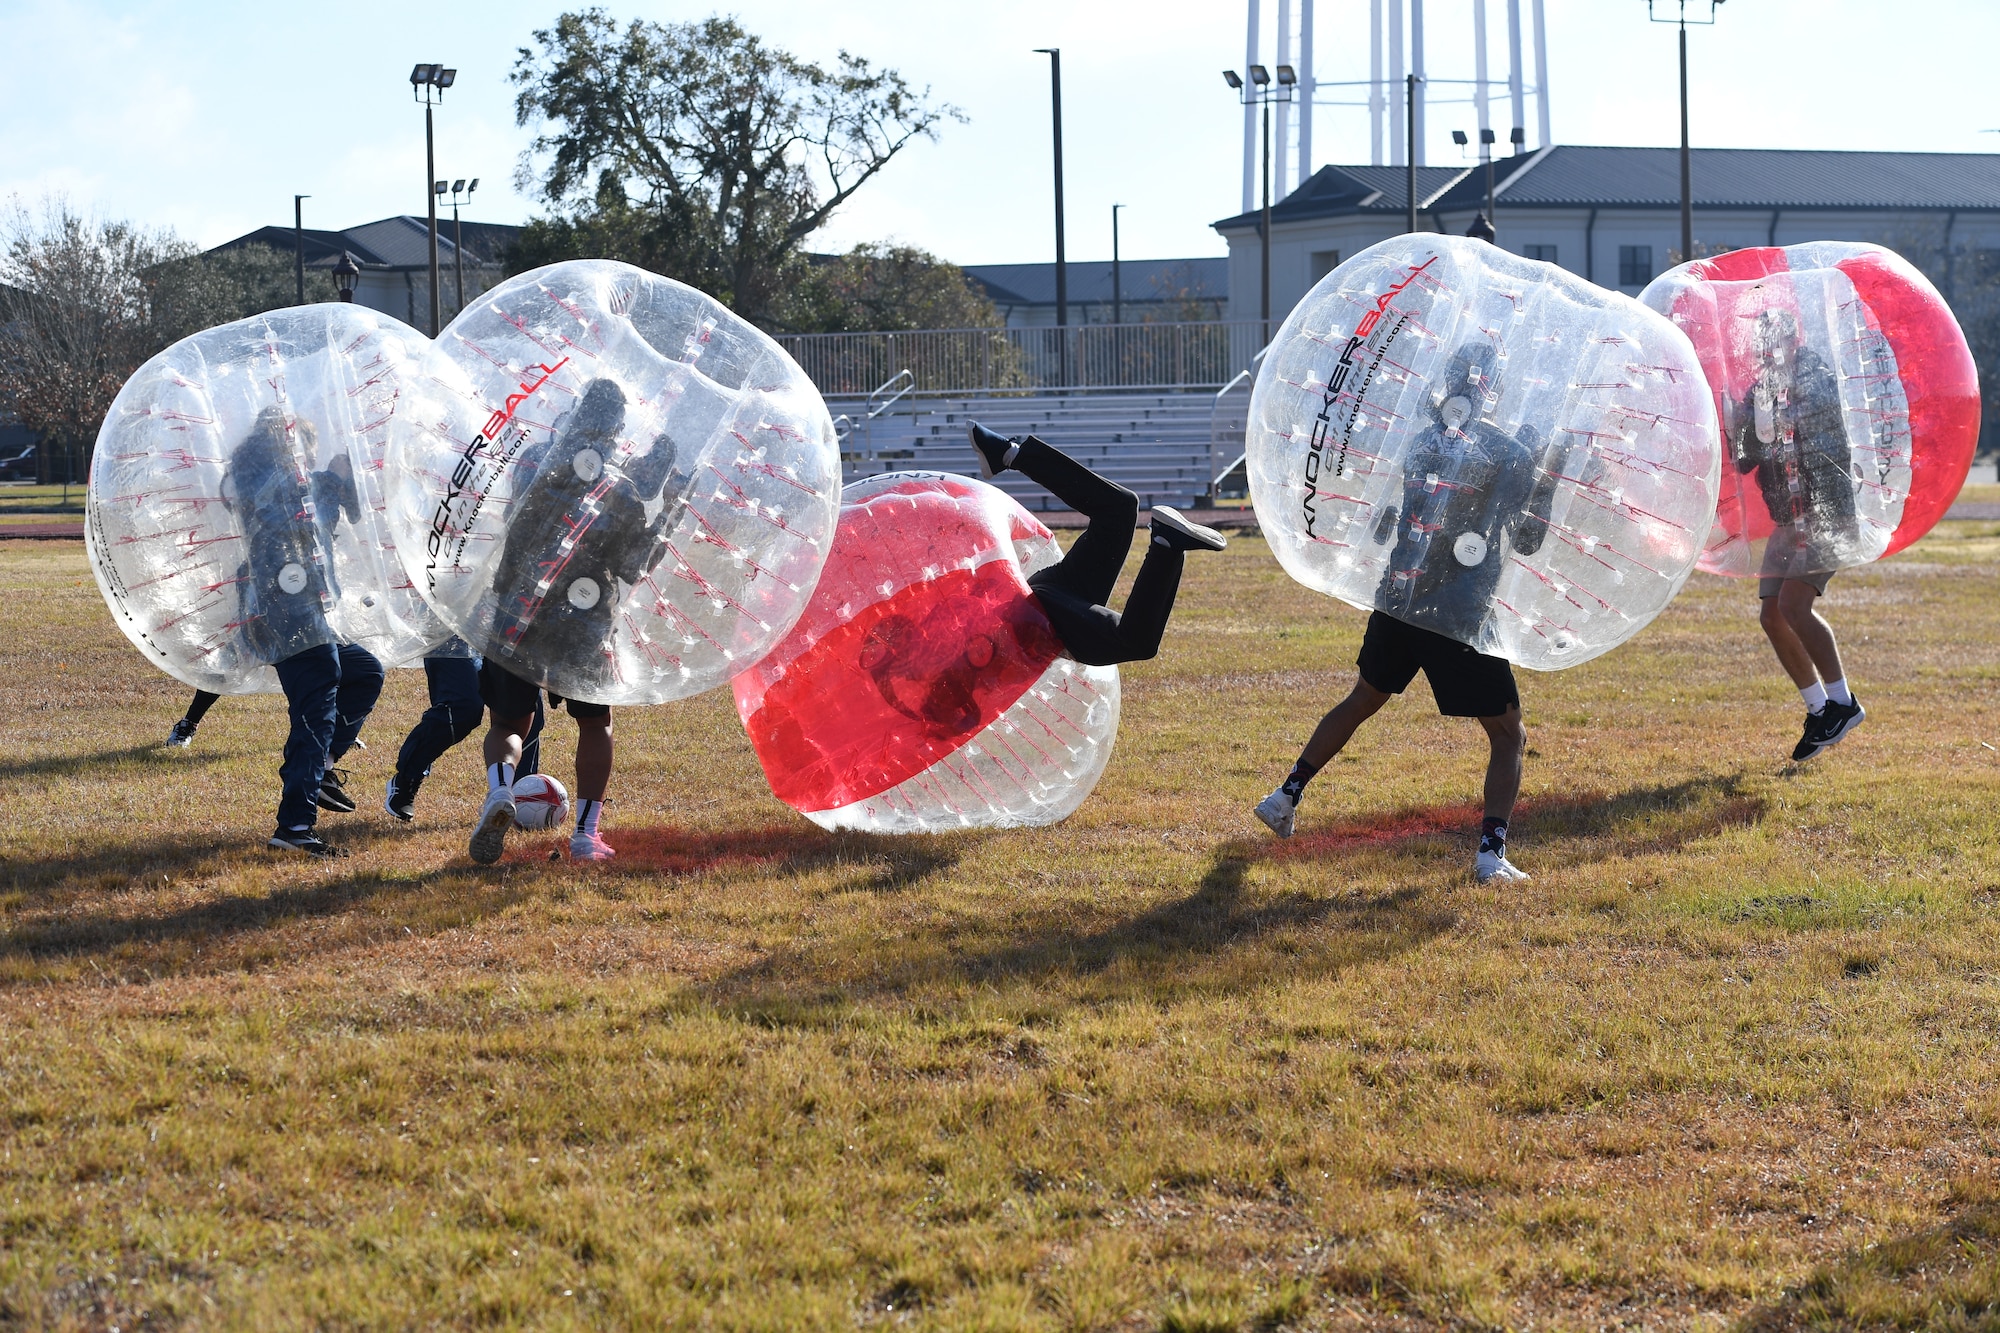 Airmen from the 81st Training Group participate in a bubble ball soccer tournament at Keesler Air Force Base, Mississippi, Dec. 21, 2020. The 81st TRG held various events for Airmen to participate in throughout the holidays, to include ice skating, inflatables, a scavenger hunt and a bubble ball soccer tournament. (U.S. Air Force photo by Kemberly Groue)